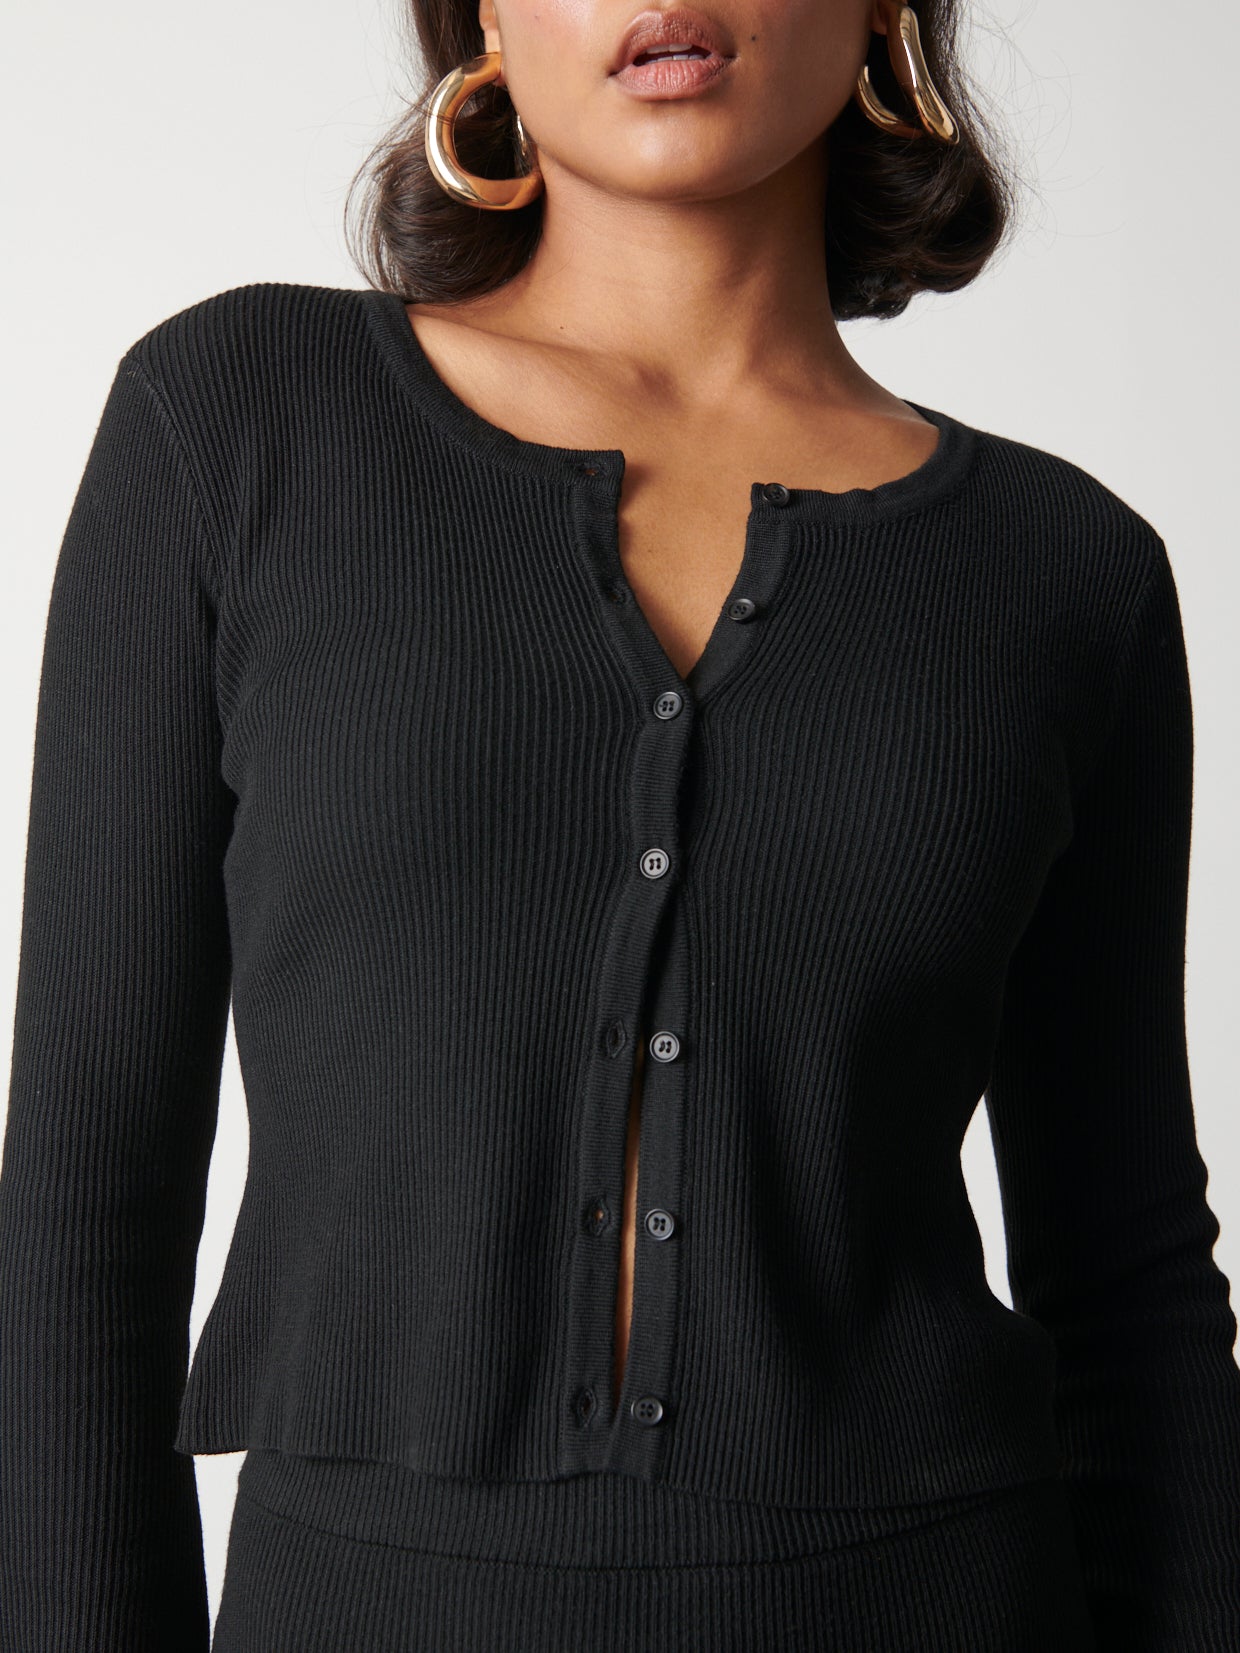 Emberlyn Button Up Knit Cardigan - Black